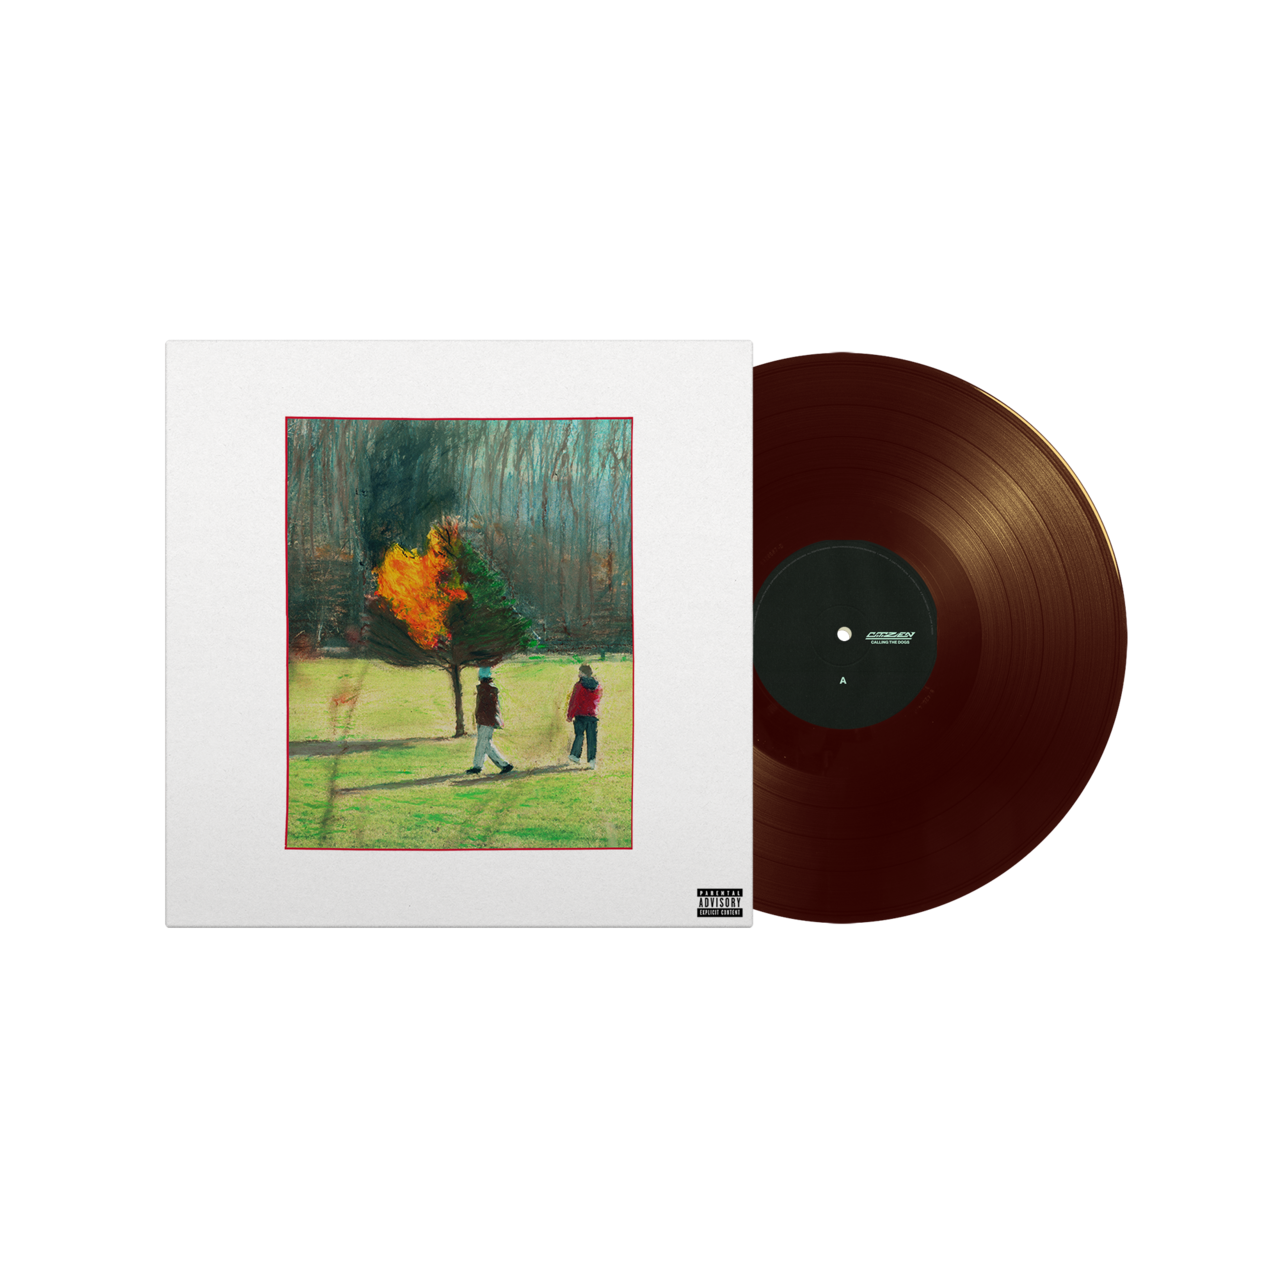 Citizen - Calling The Dogs: Limited Brown Vinyl LP